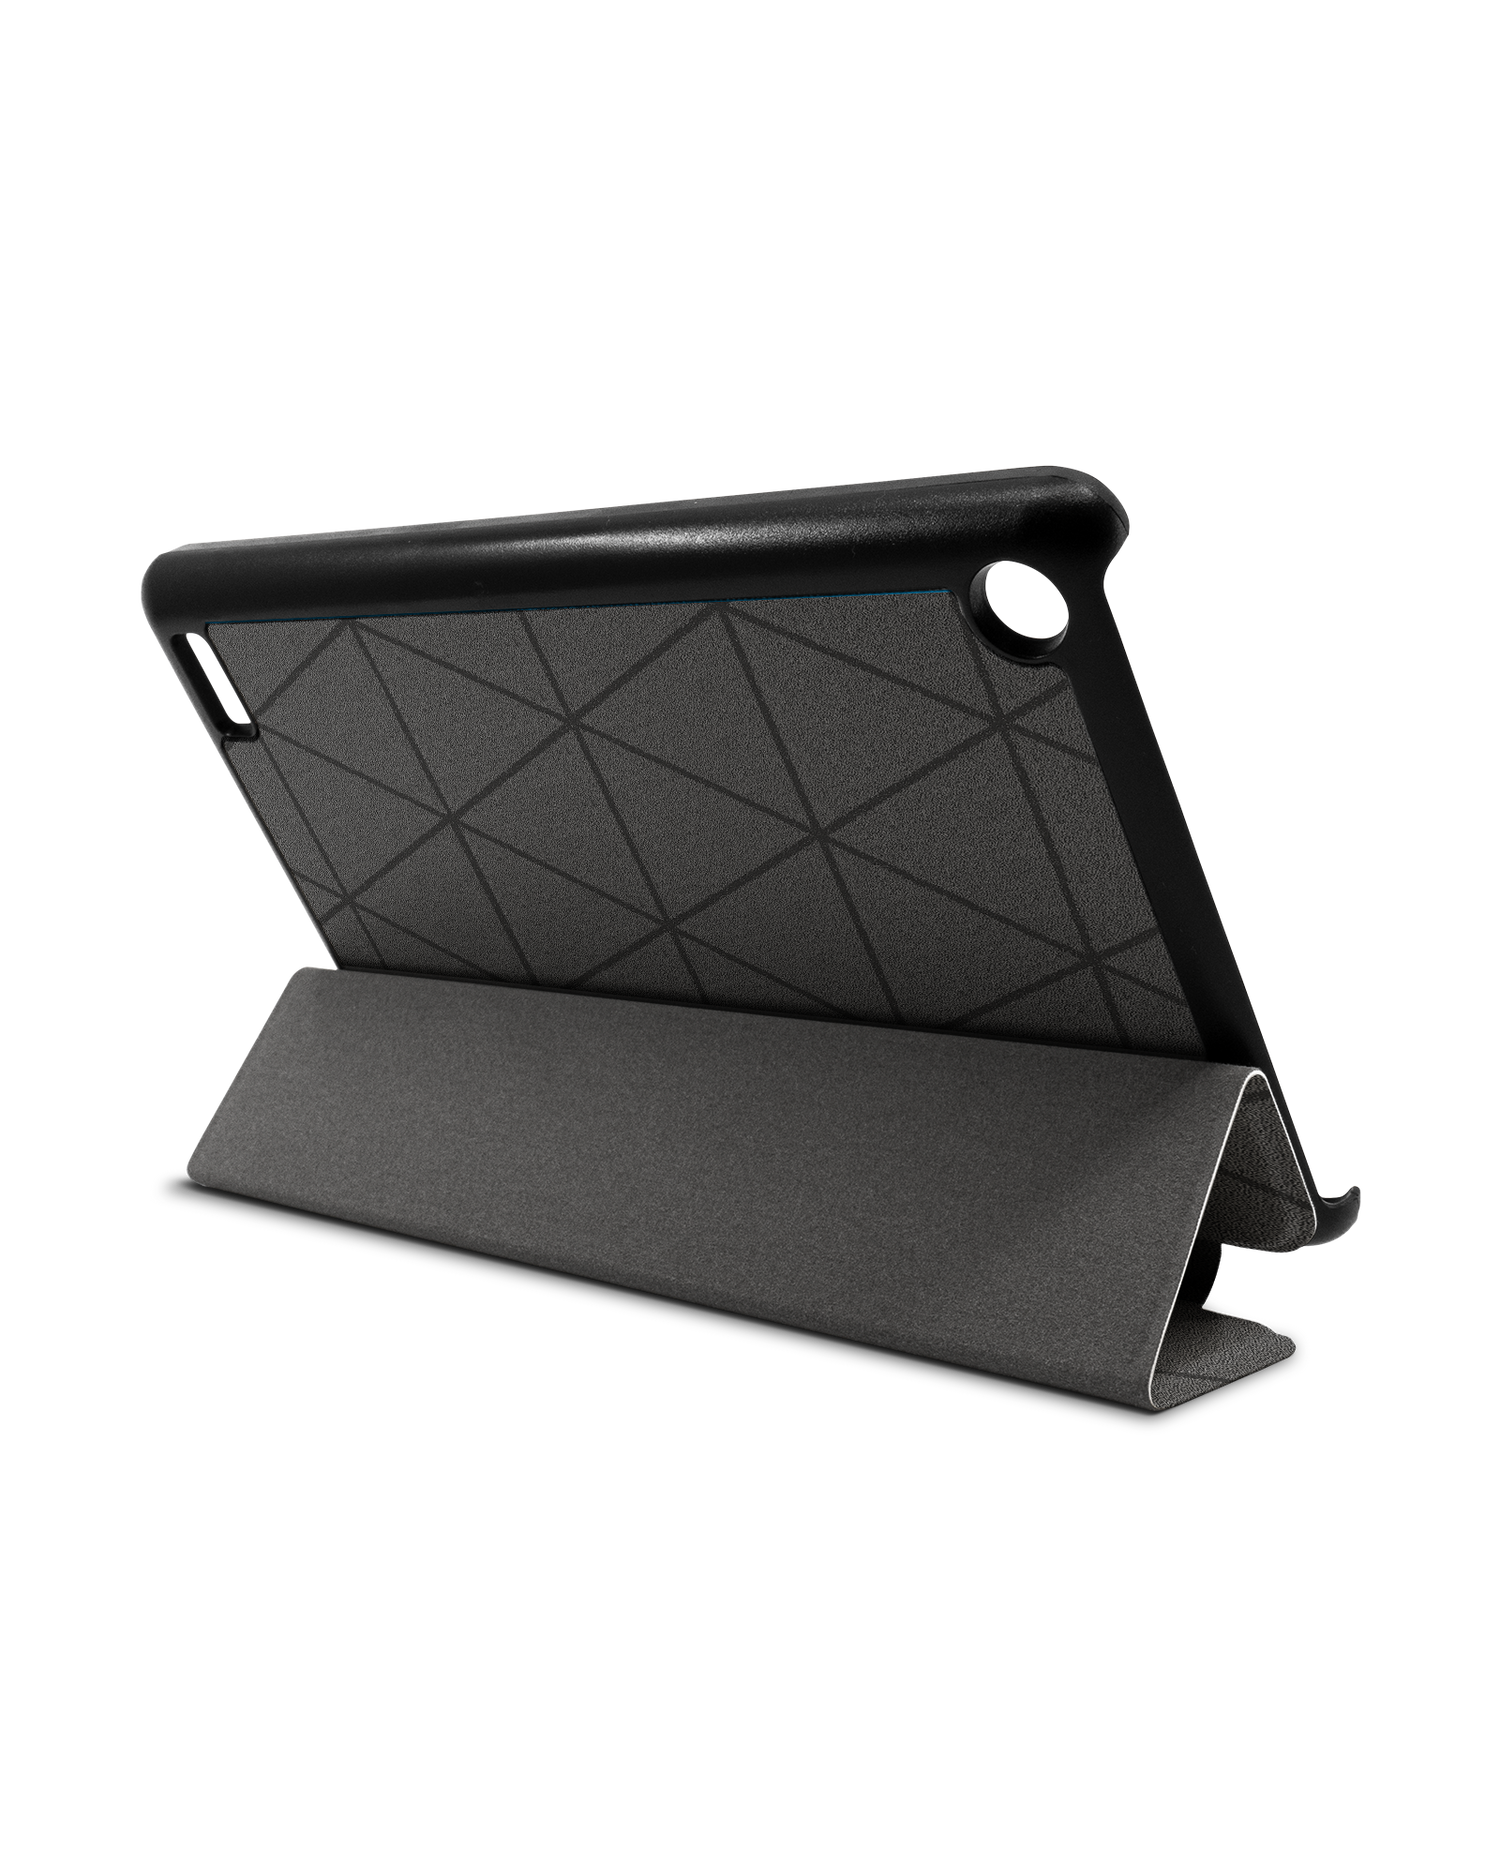 Ash Tablet Smart Case for Amazon Fire 7: Used as Stand